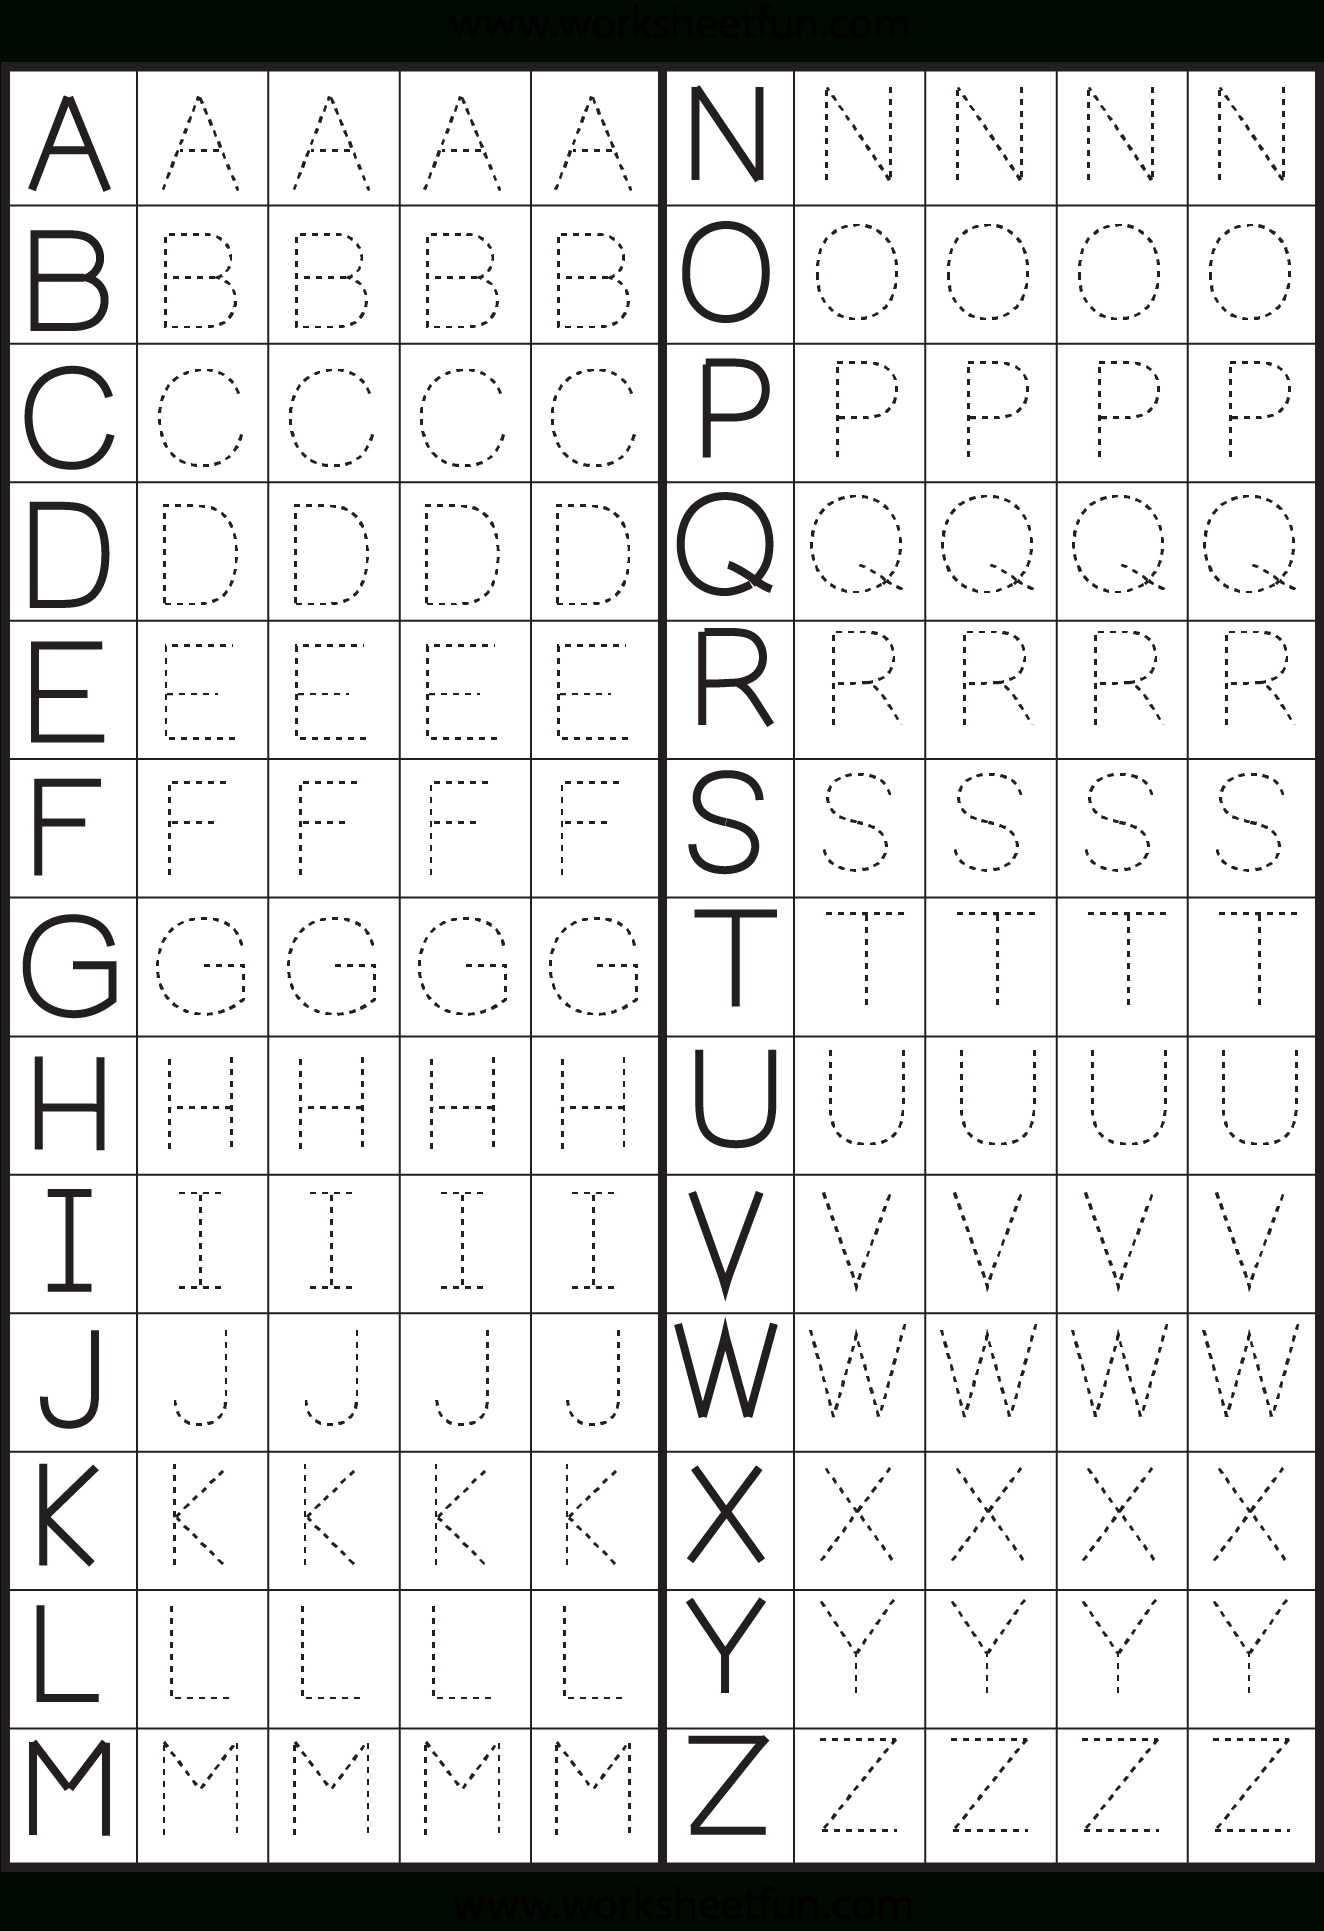 Make A Printable Alphabet Letter Tracing Worksheets | Letter Tracing - Free Printable Tracing Letters And Numbers Worksheets